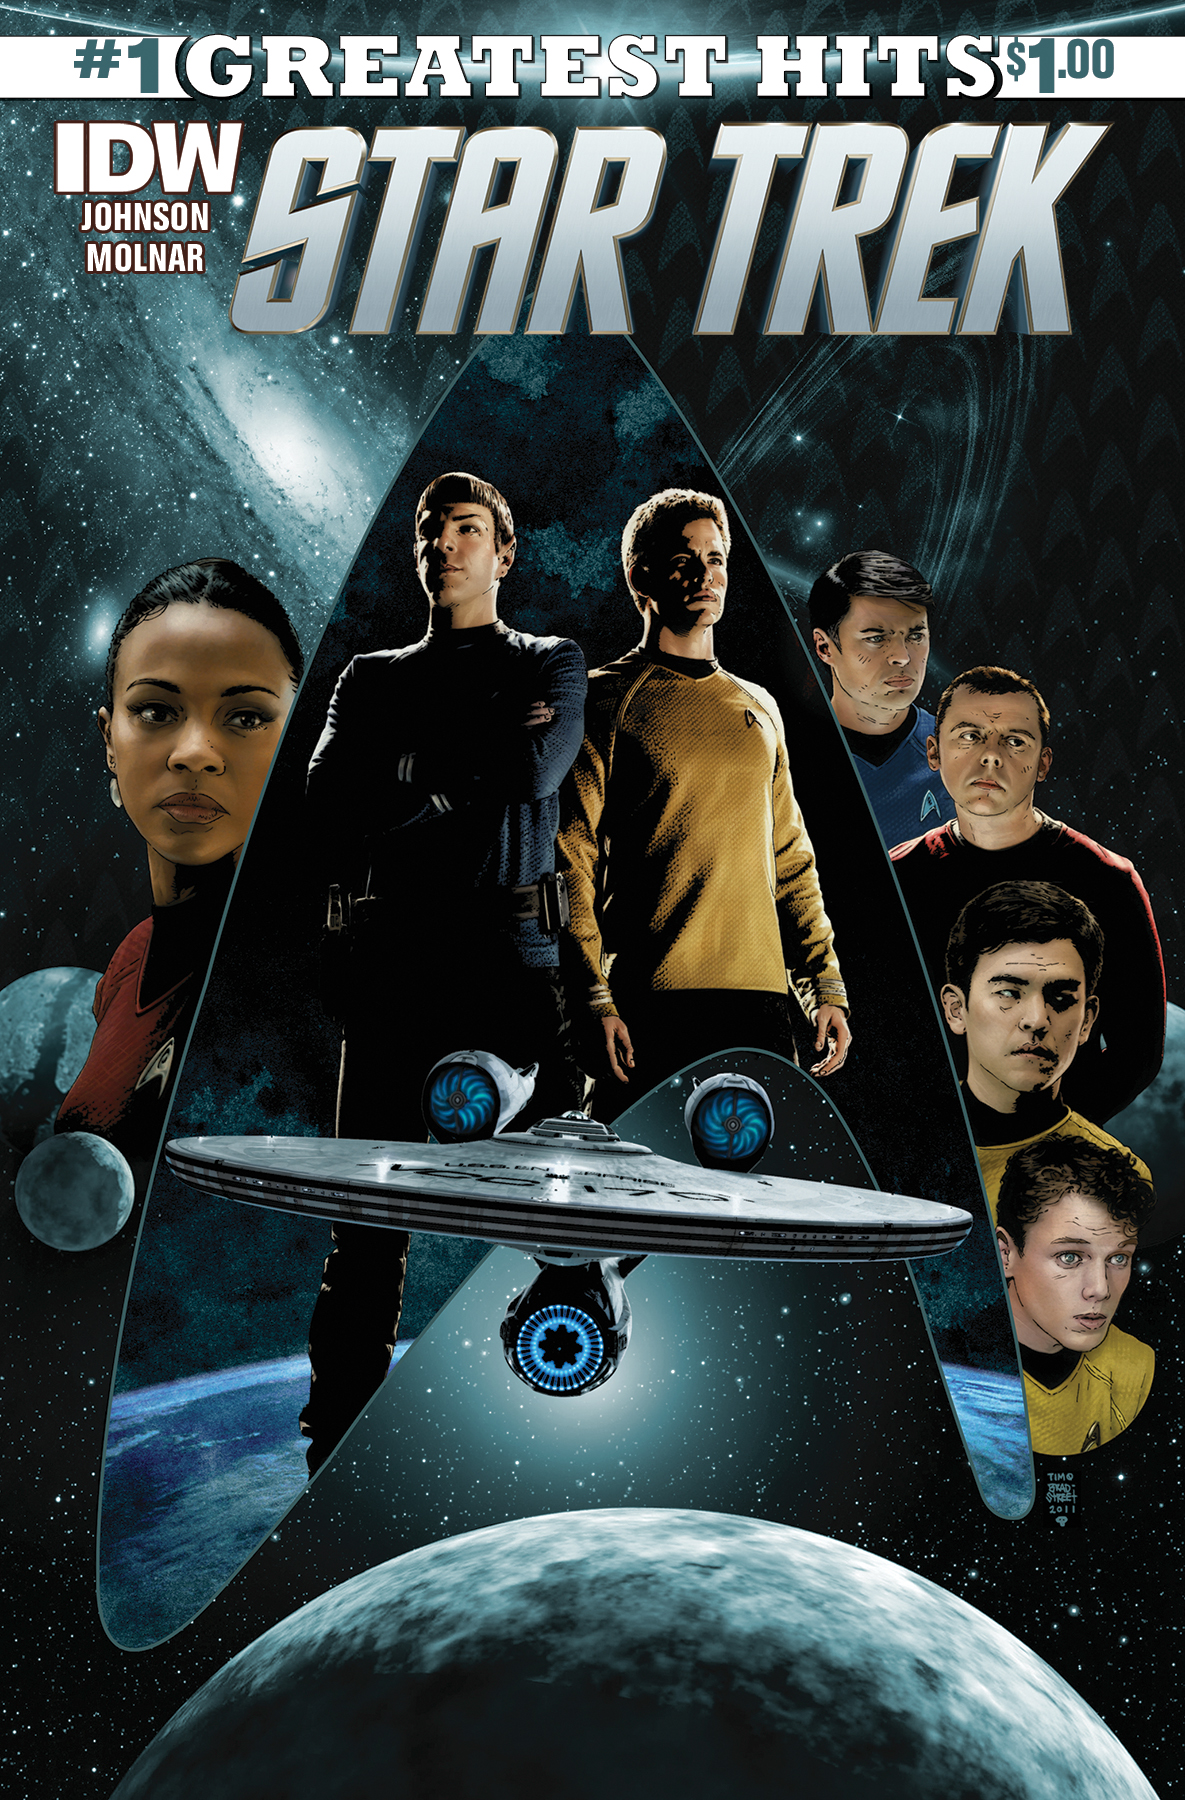 Star Trek #1 IDW’s Greatest Hits Edition Cover